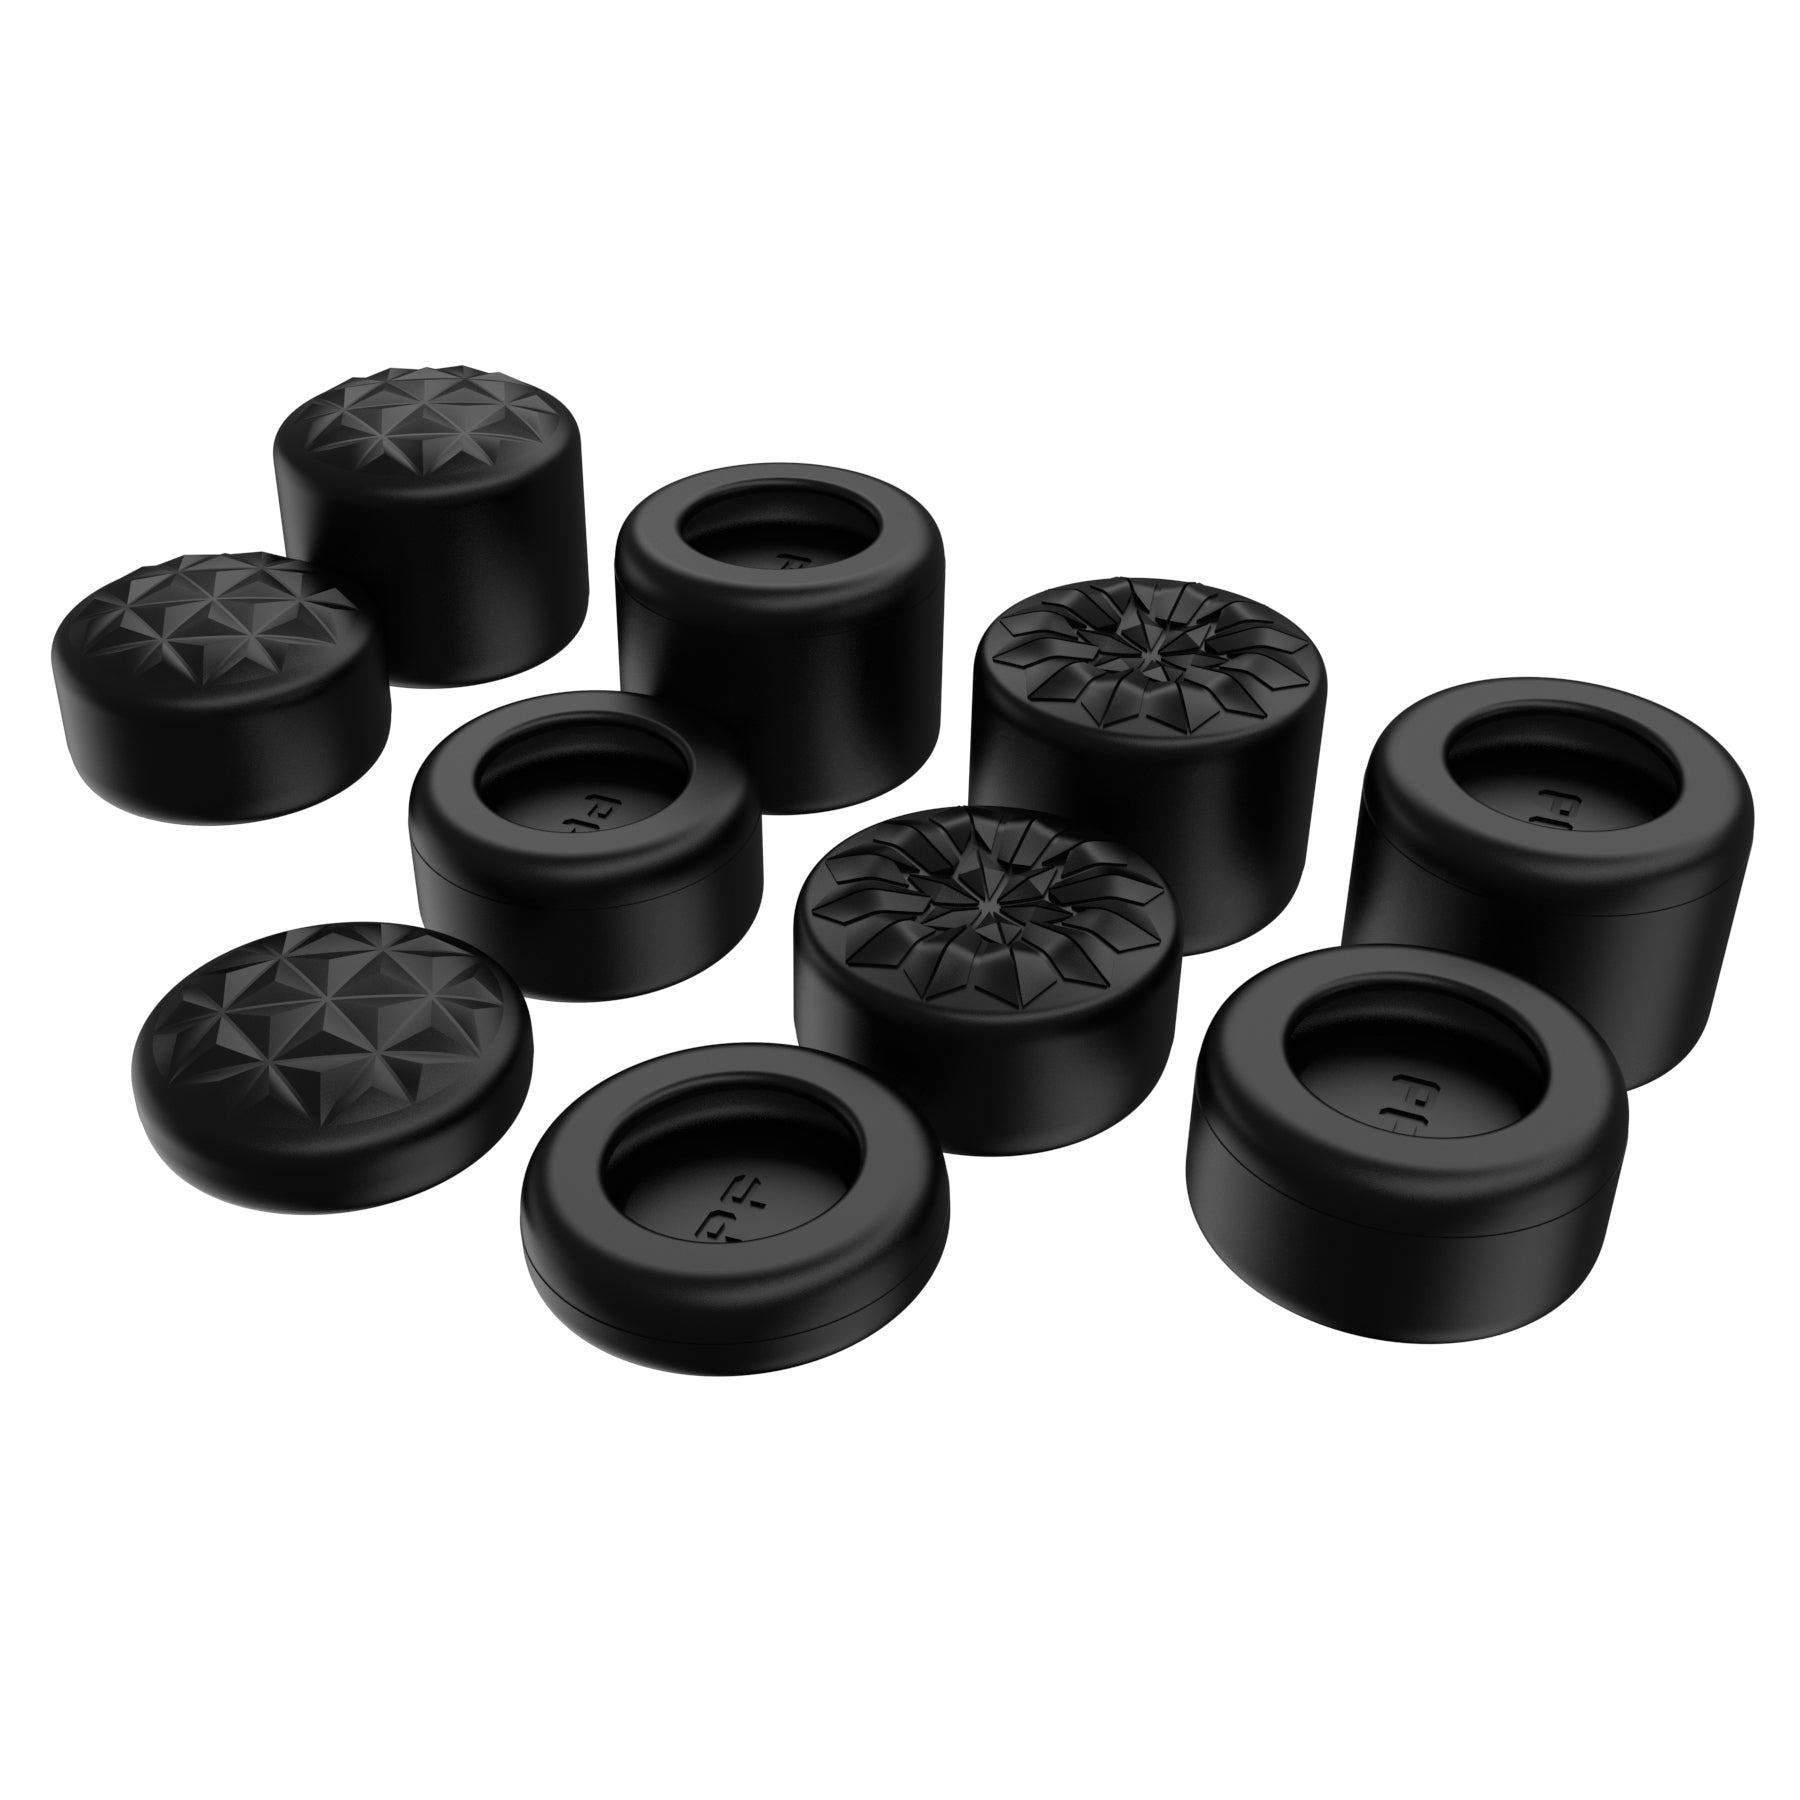 PlayVital 10 Pcs Ergonomic Thumbstick Grips for ps5, for ps4, QUANTUM Universal Pro Thumb Grip Caps for Xbox Series X/S, Xbox One/Elite Series 2, Switch Pro - with 3 Height Convex and Concave - Black - PJM2049 PlayVital